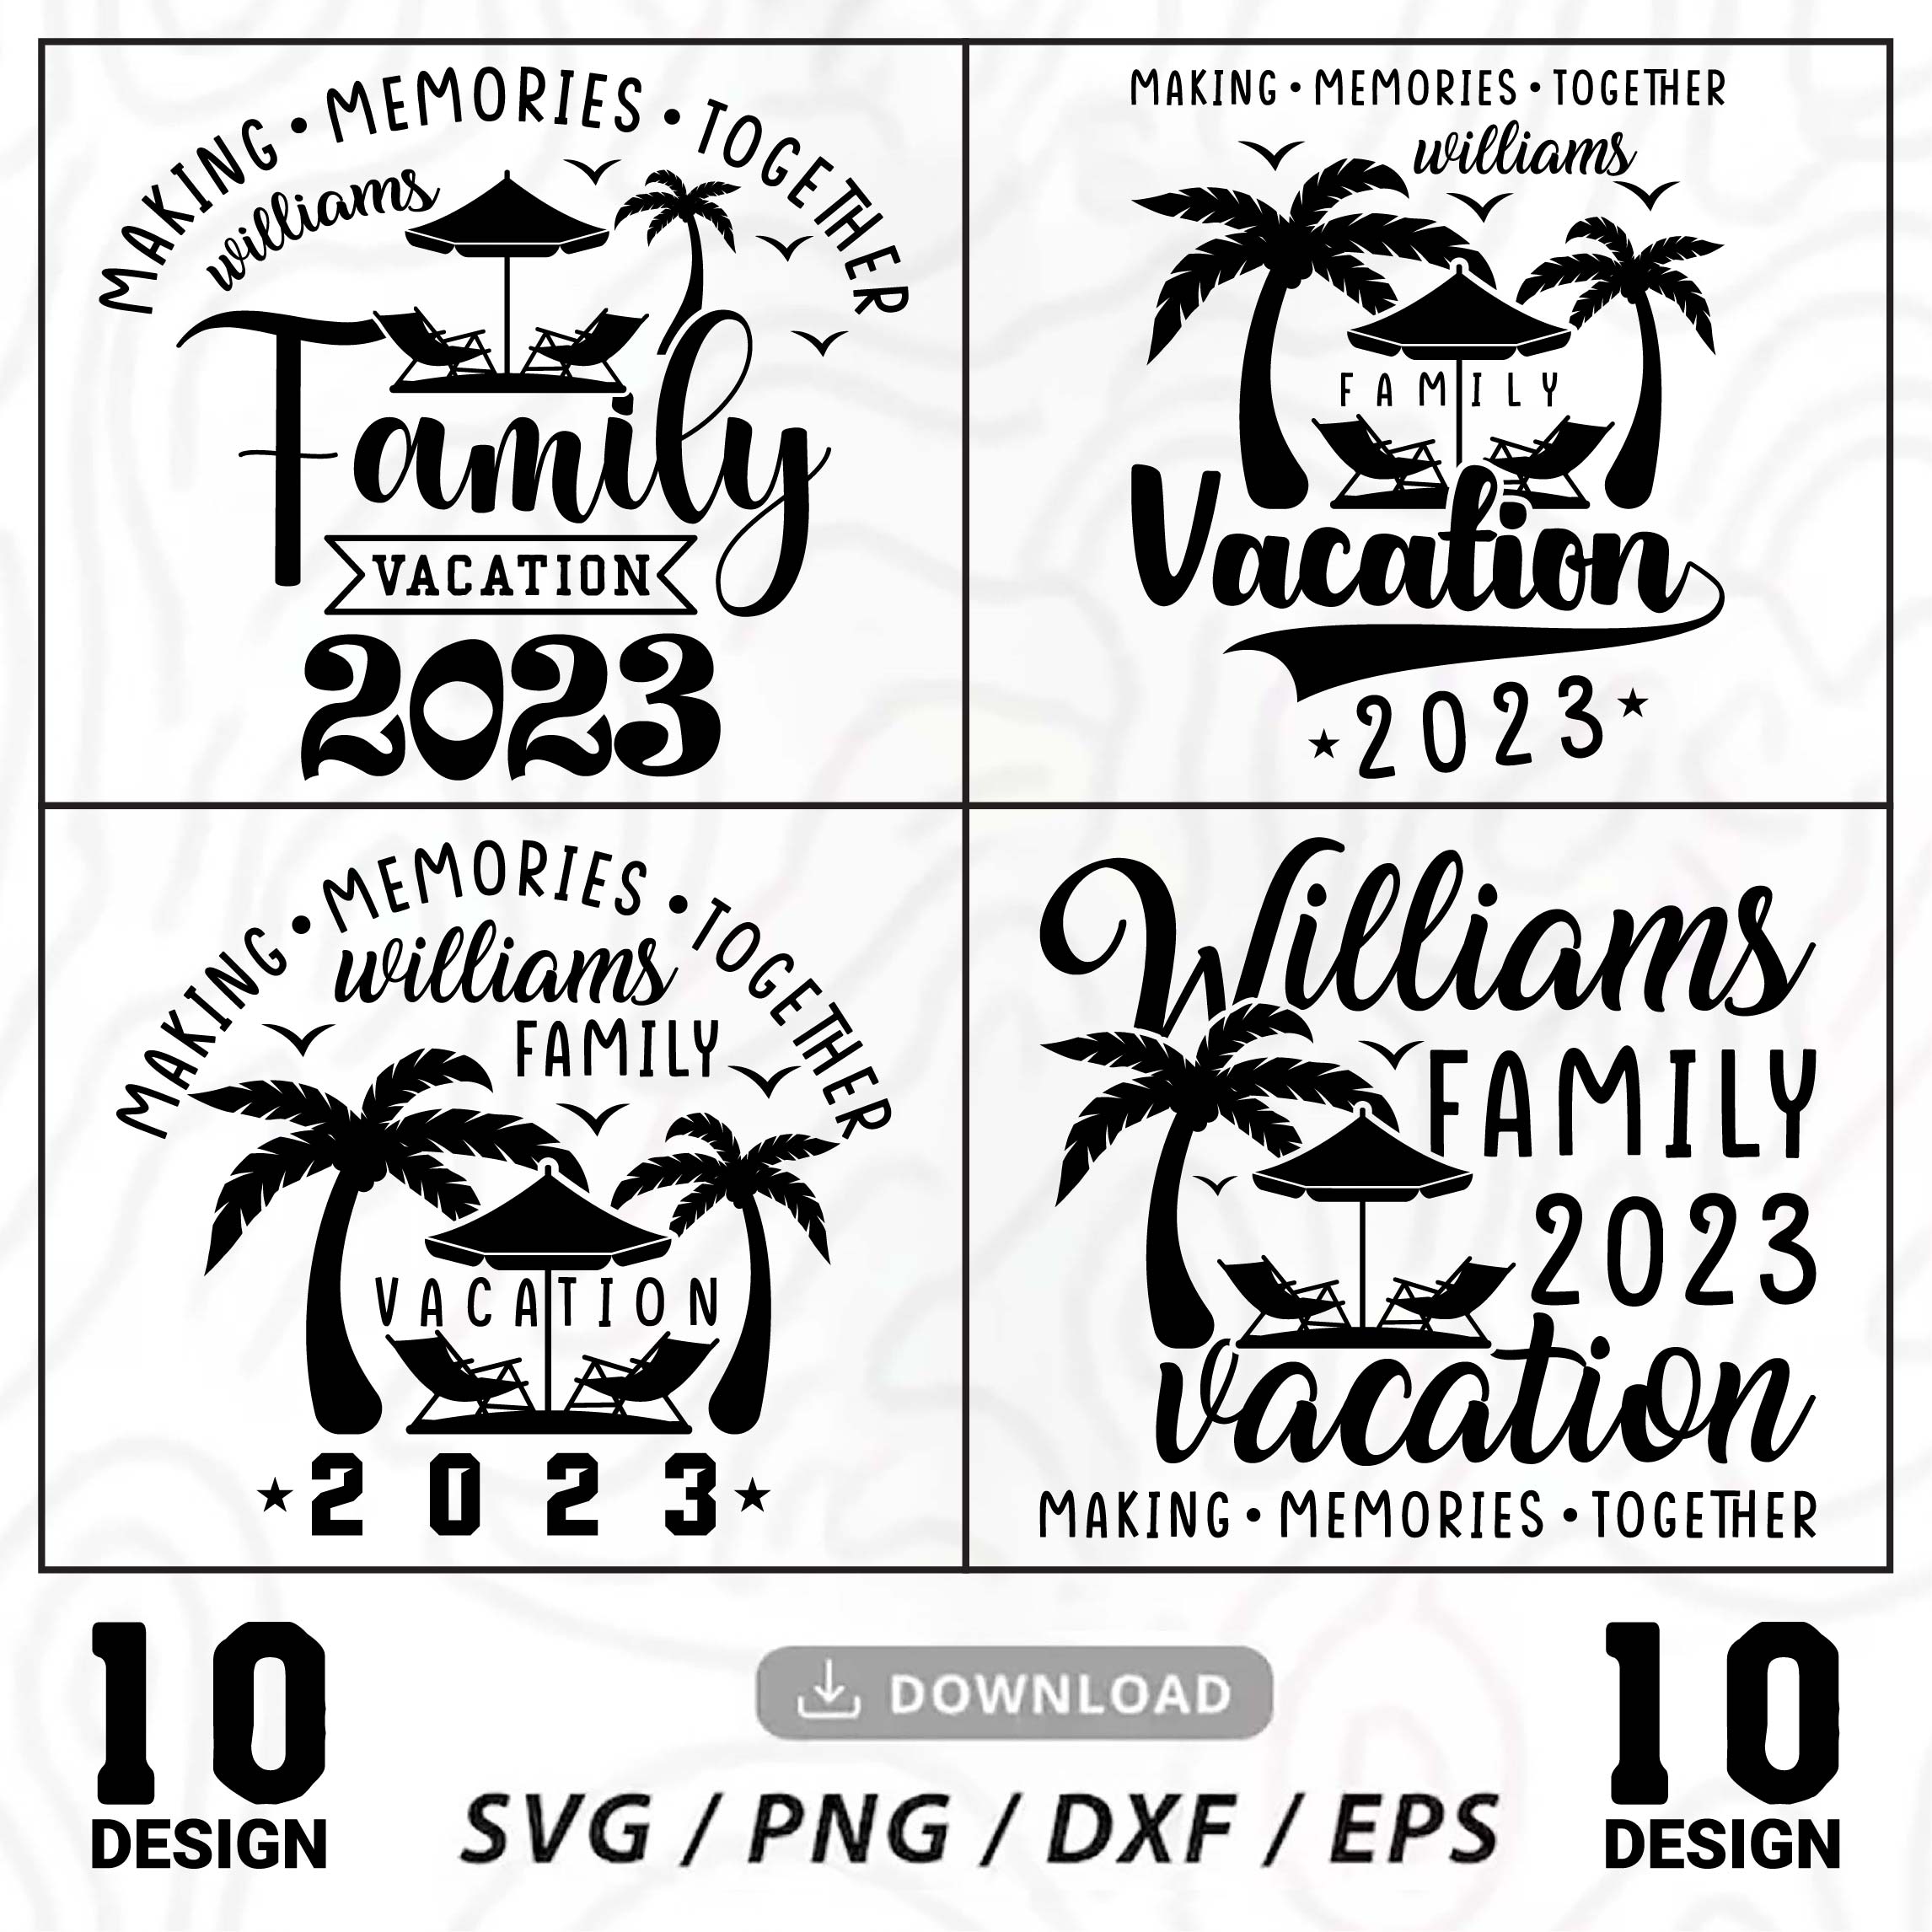 Family Vacation 2023 SVG, Making Memories together, Custom Family Vacation cut files, Summer 2023 vacations cover image.